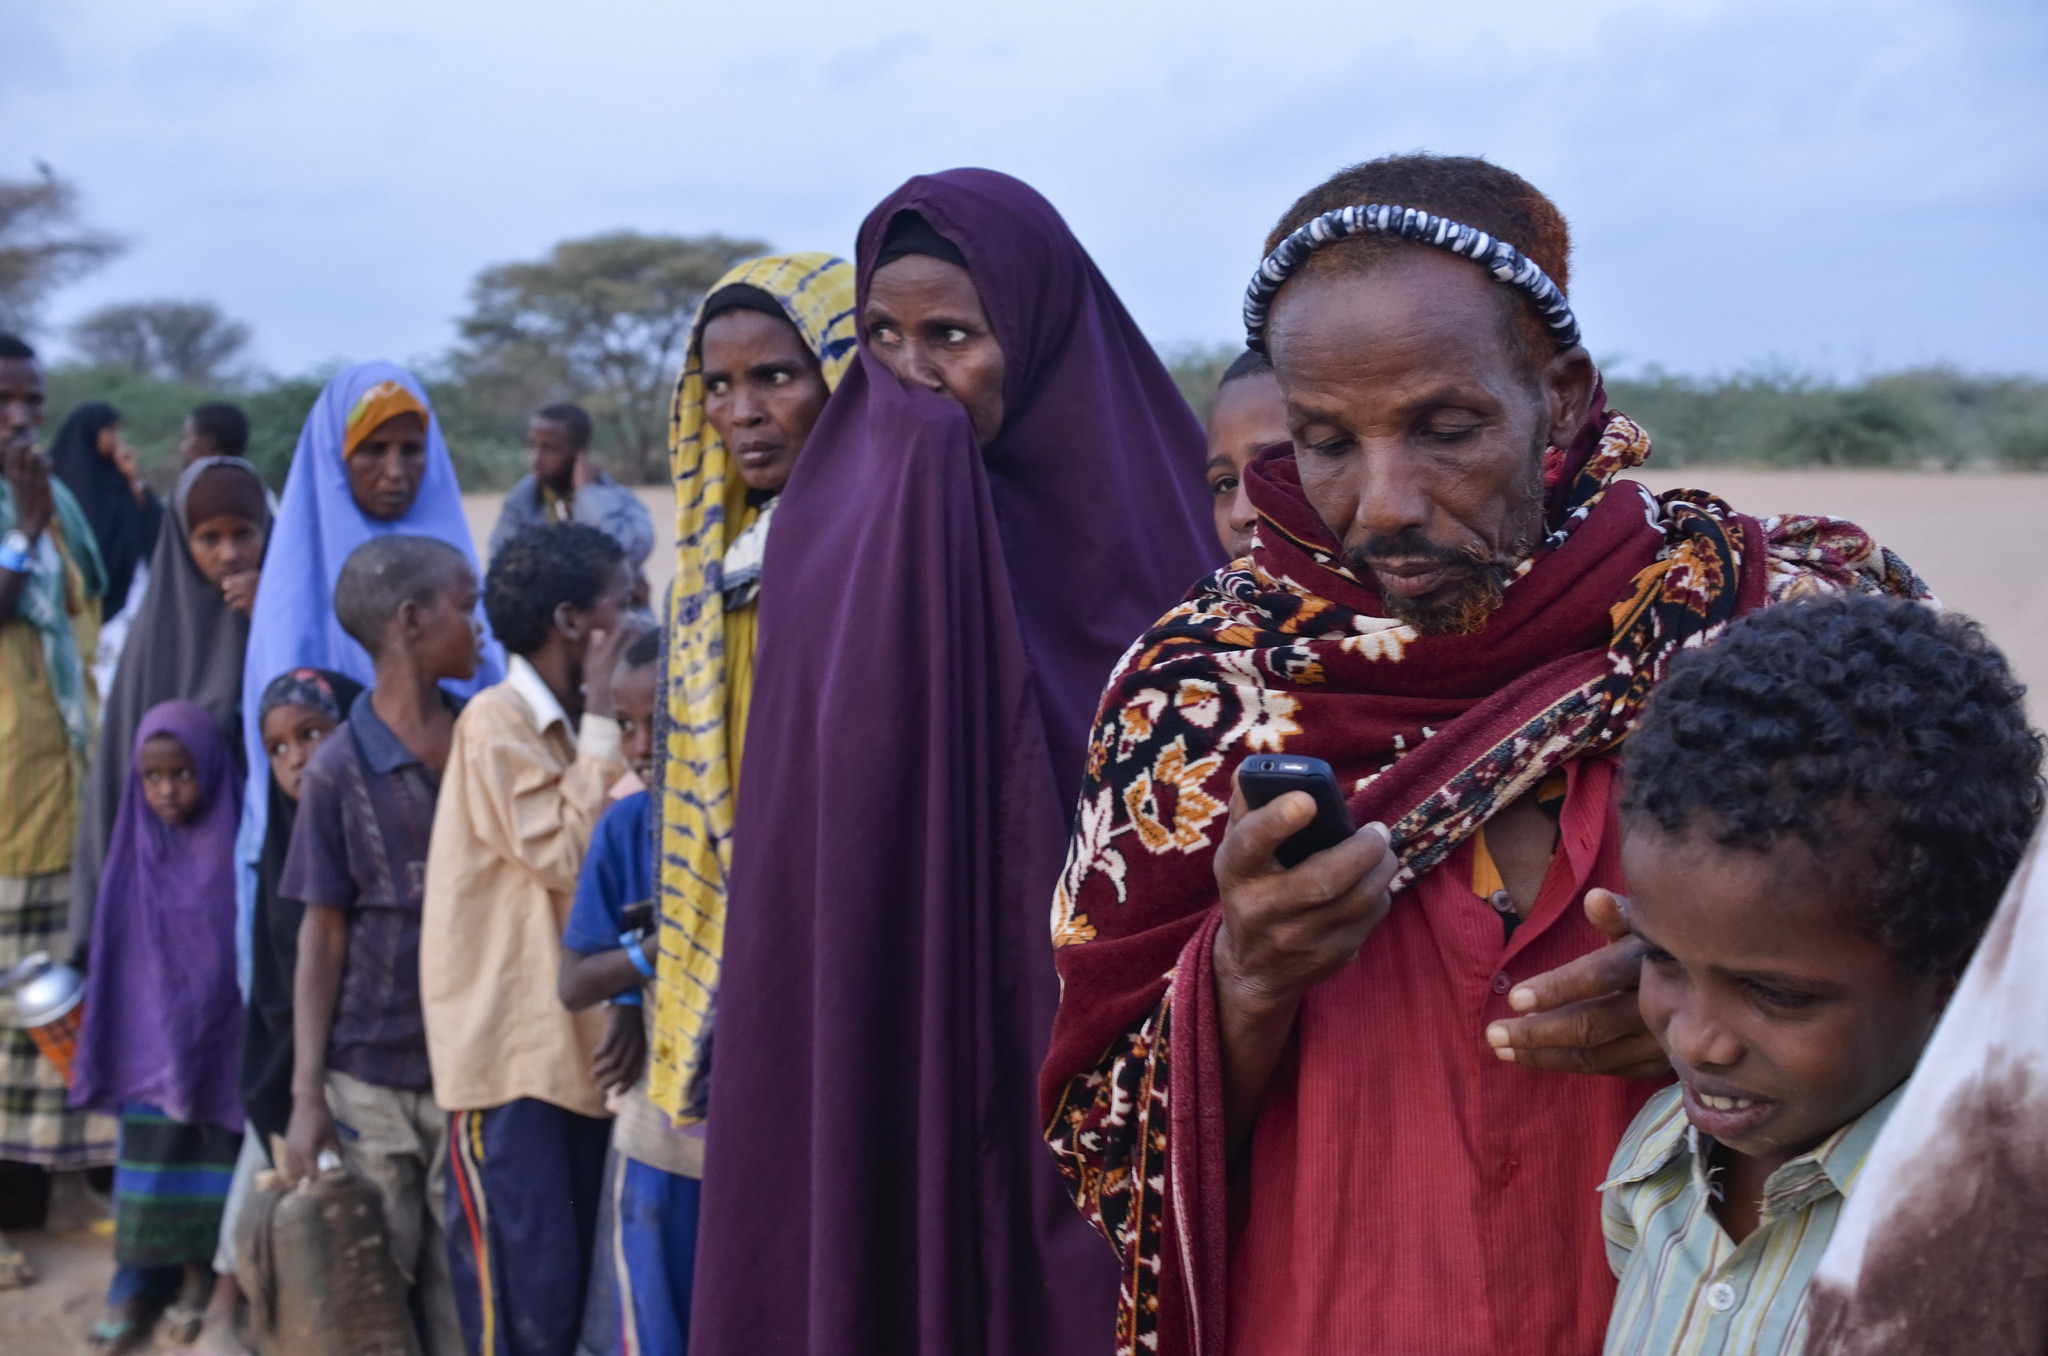 Waiting to register at Ifo refugee camp, Dadaab, Kenya (Internews Europe/Flickr CC BY-NC-ND 2.0)